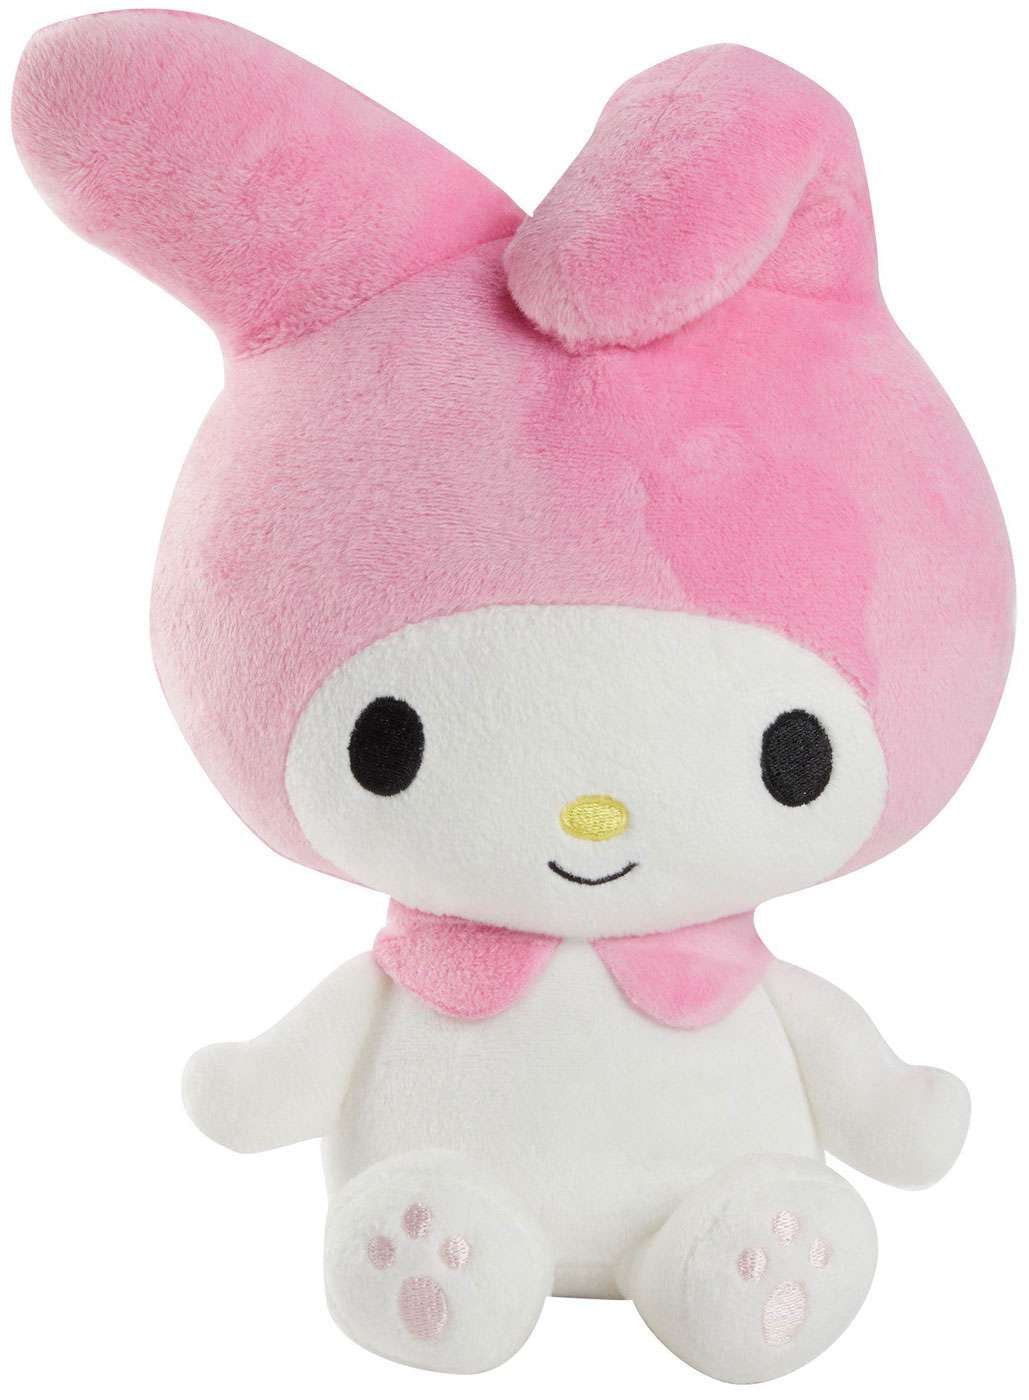 My Melody Plush and Hello Kitty Sanrio Friends Set of 5 Dolls